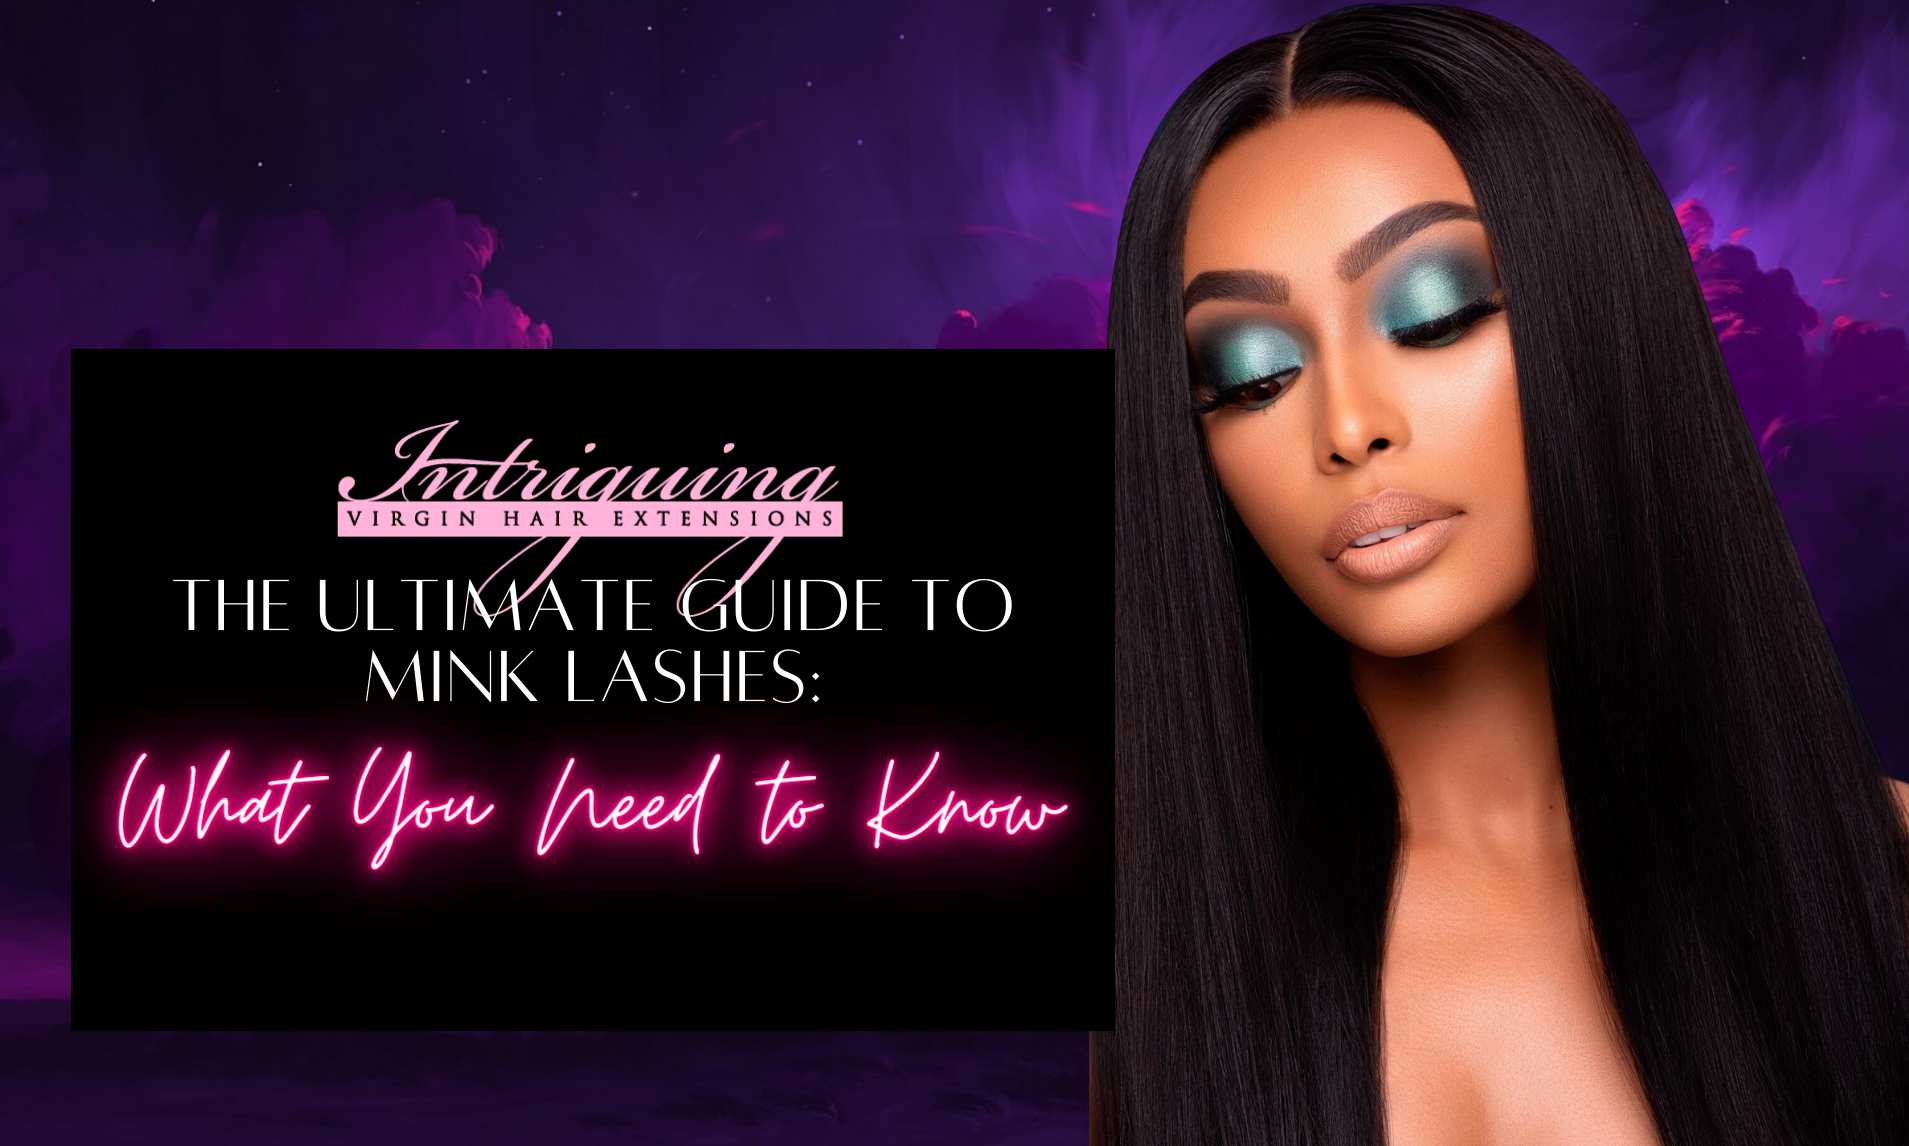 The Ultimate Guide to Mink Lashes: What You Need to Know